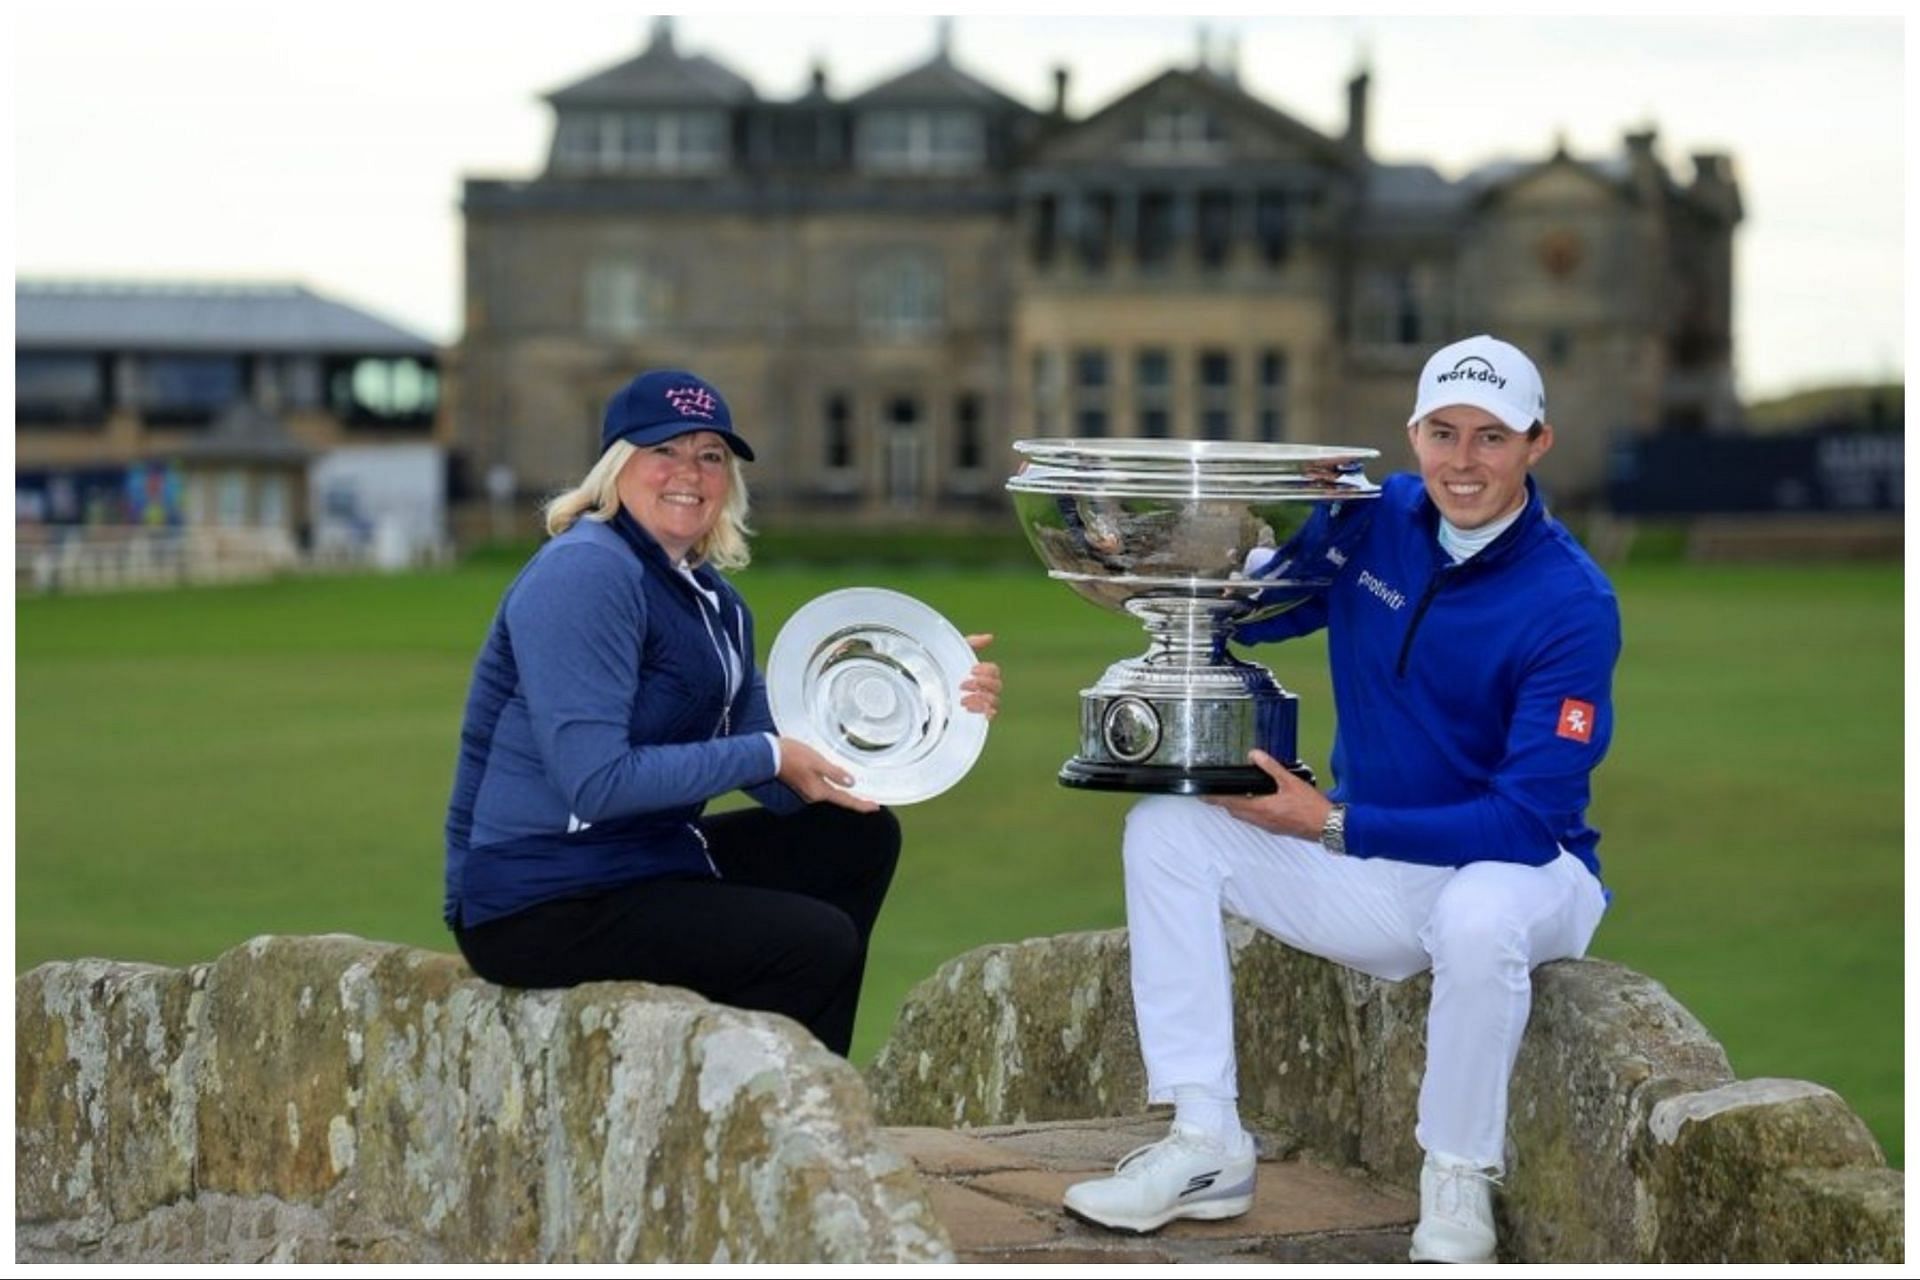 Matt Fitzpatrick poses with his mother after winning the Alfred Dunhill Links Championship 2023( Image via Twitter/com/DPWorldTour